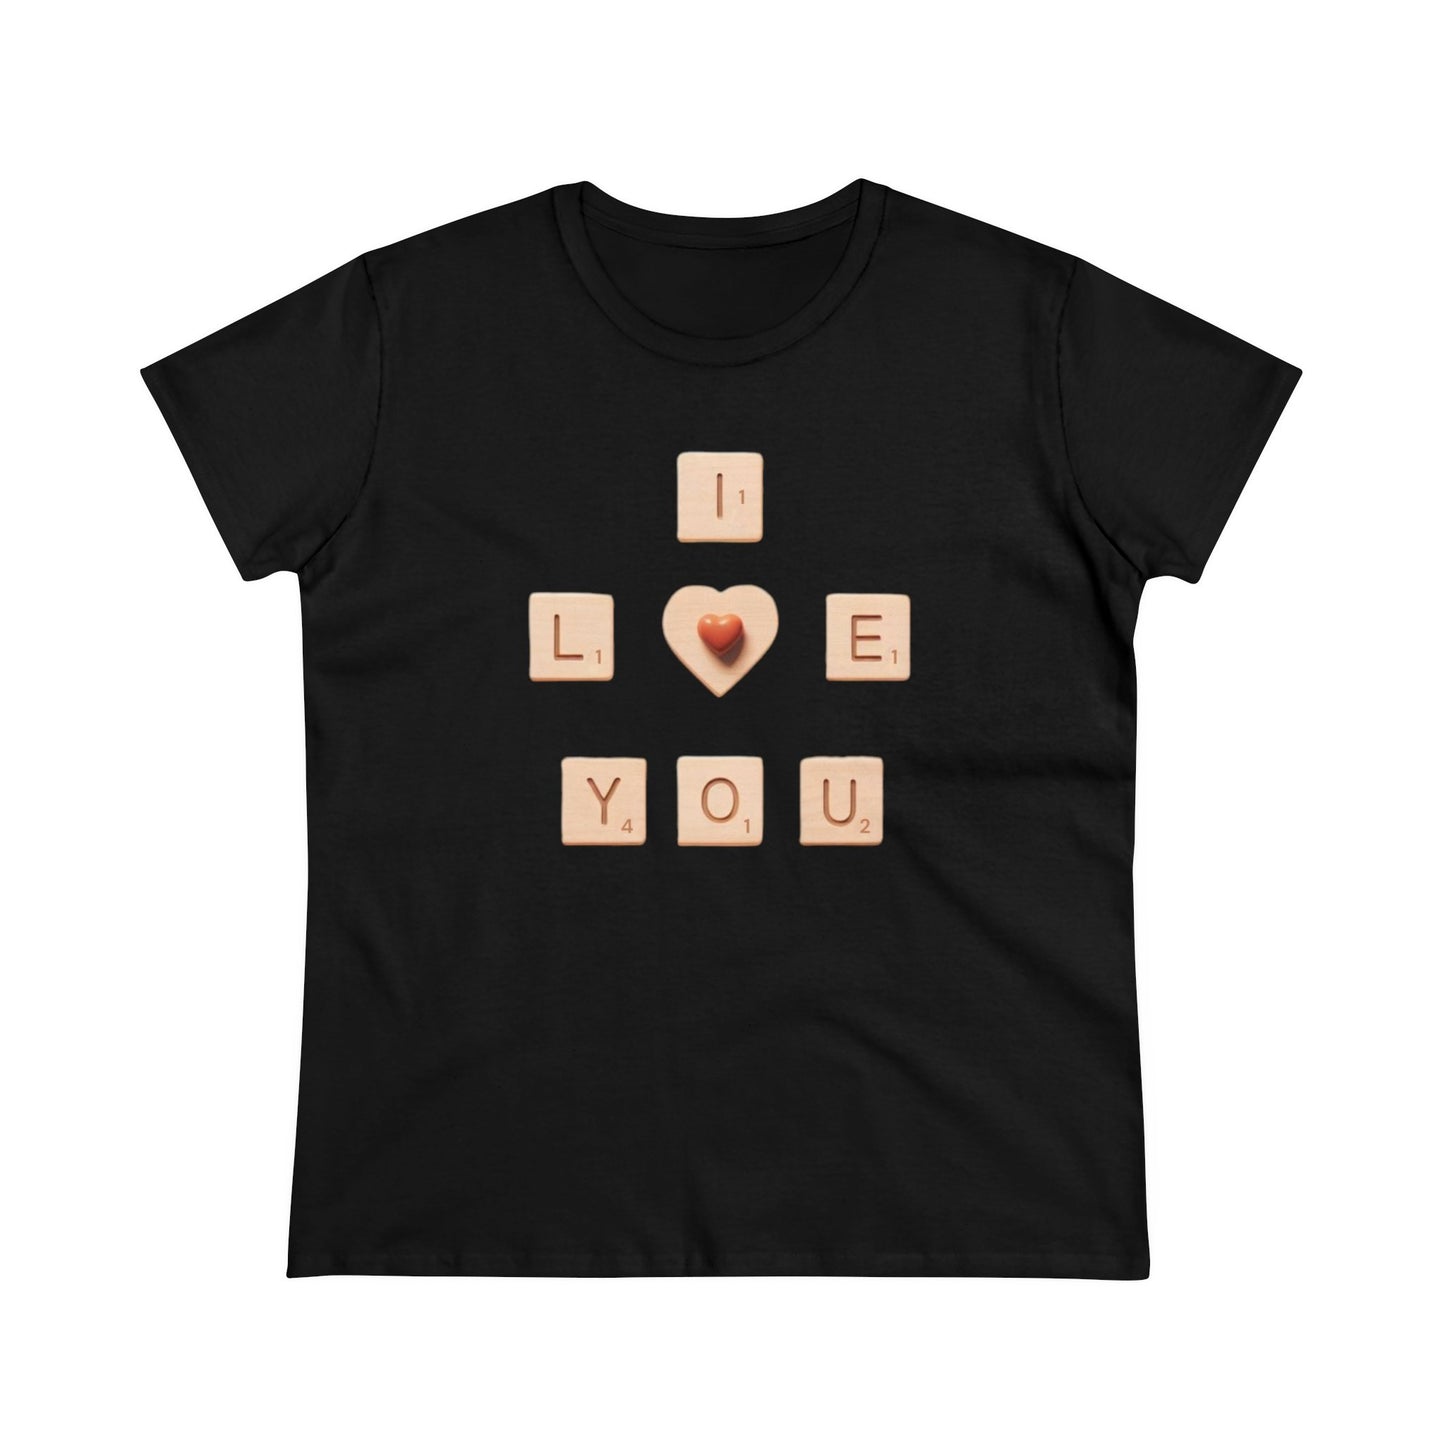 Tile Talk: Women's 'I Love You' Scrabble Graphic Tee - Spellbound Affection! Midweight Cotton Tee